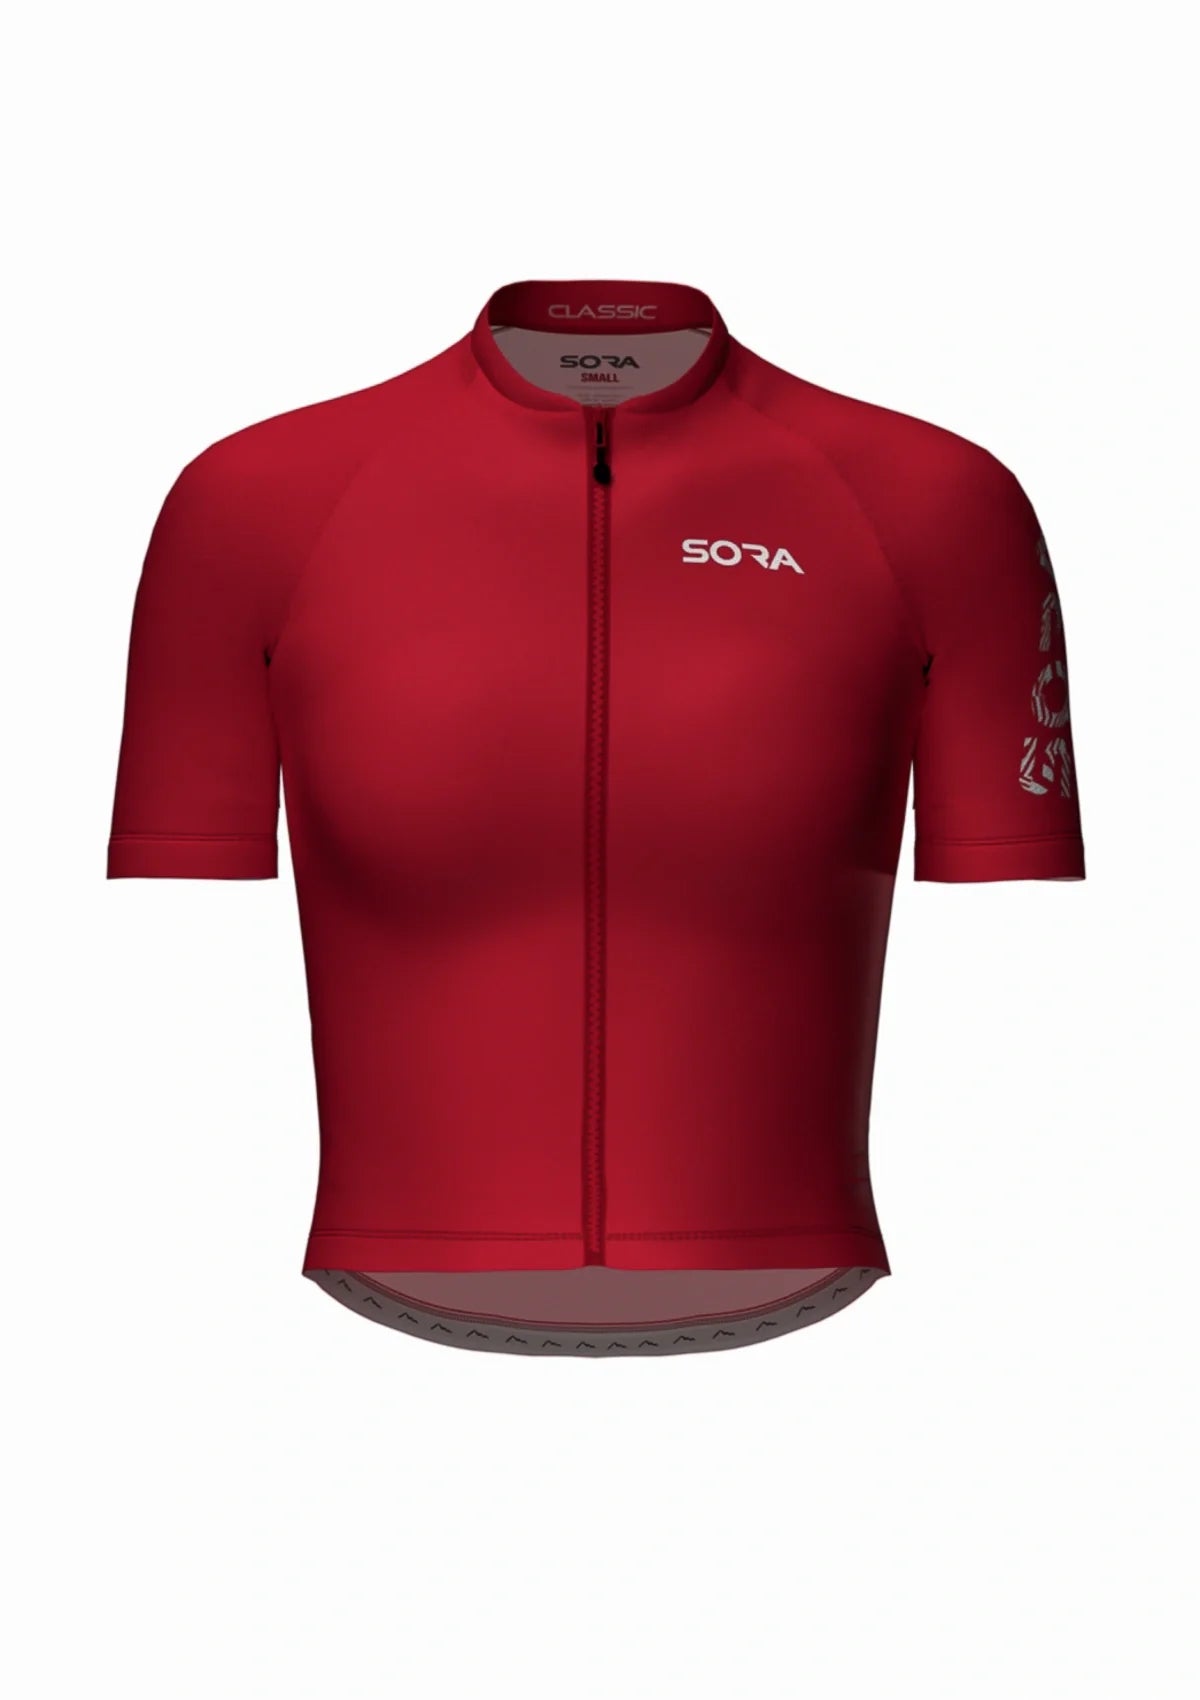 Classic Women's Jersey Red